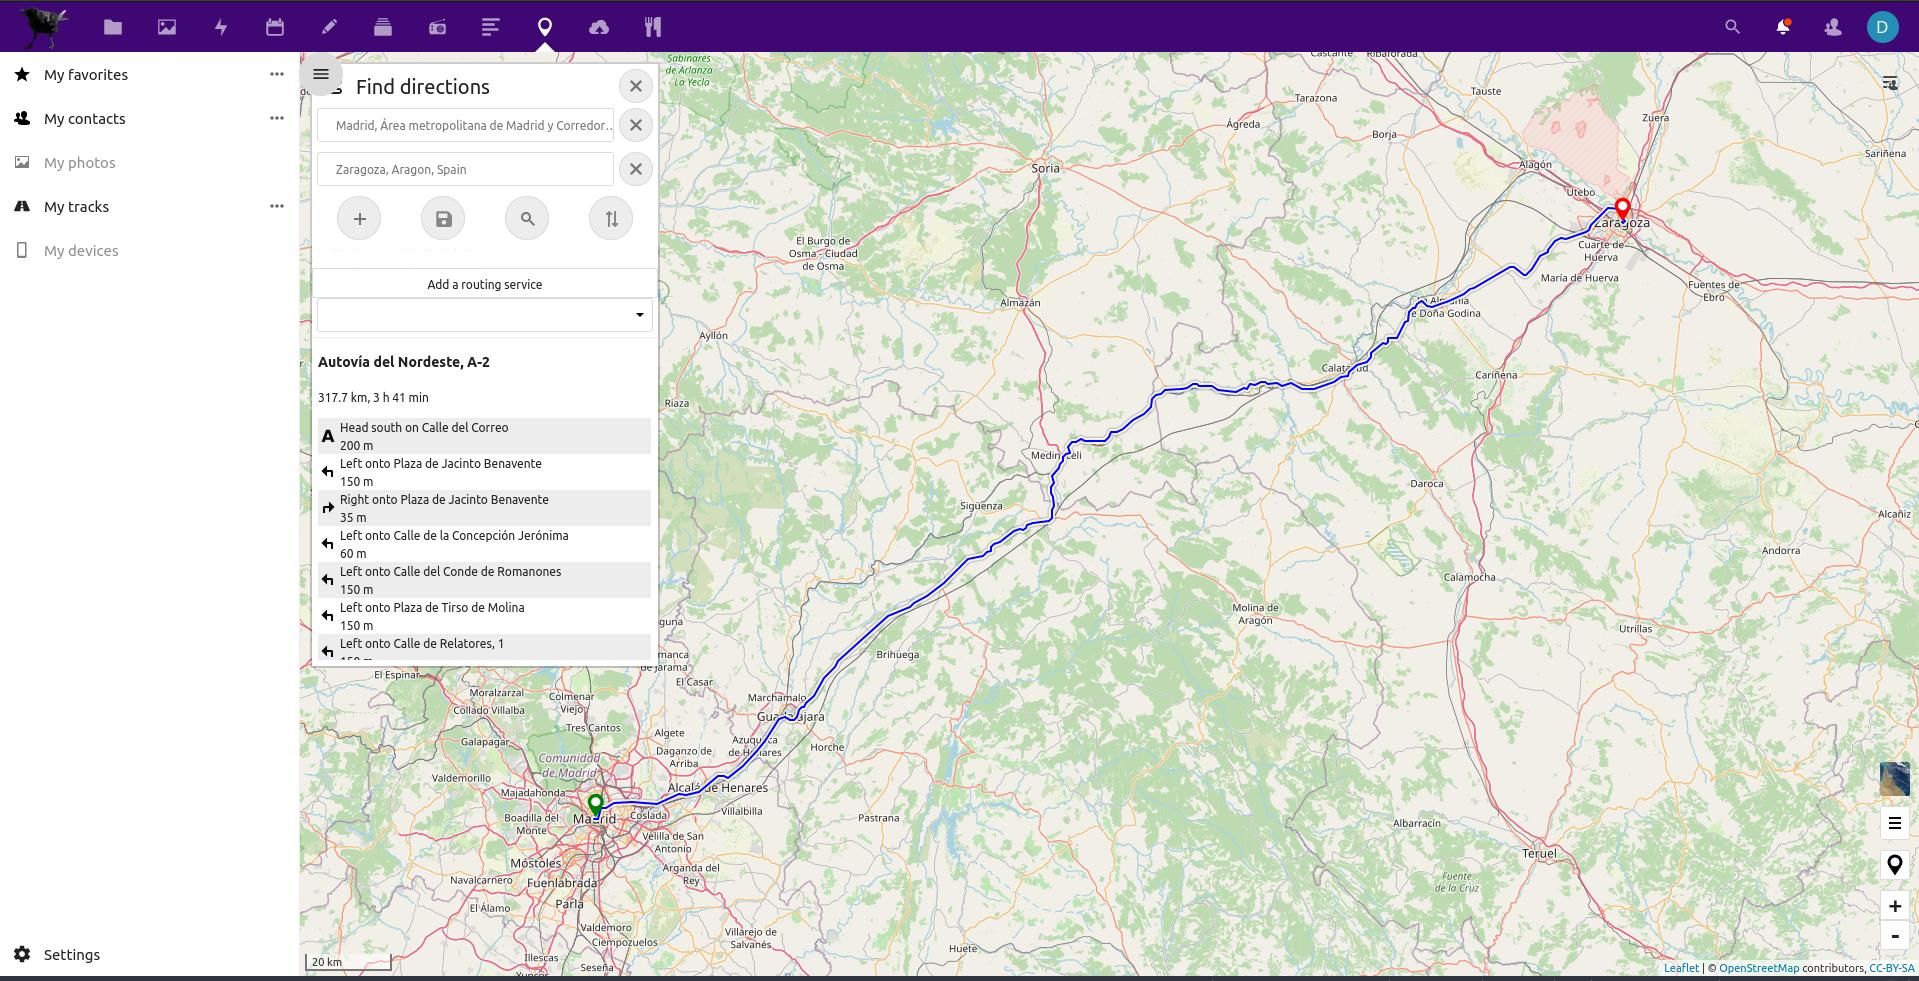 nextcloud maps showing a route planned between Madrid and Zaragoza 